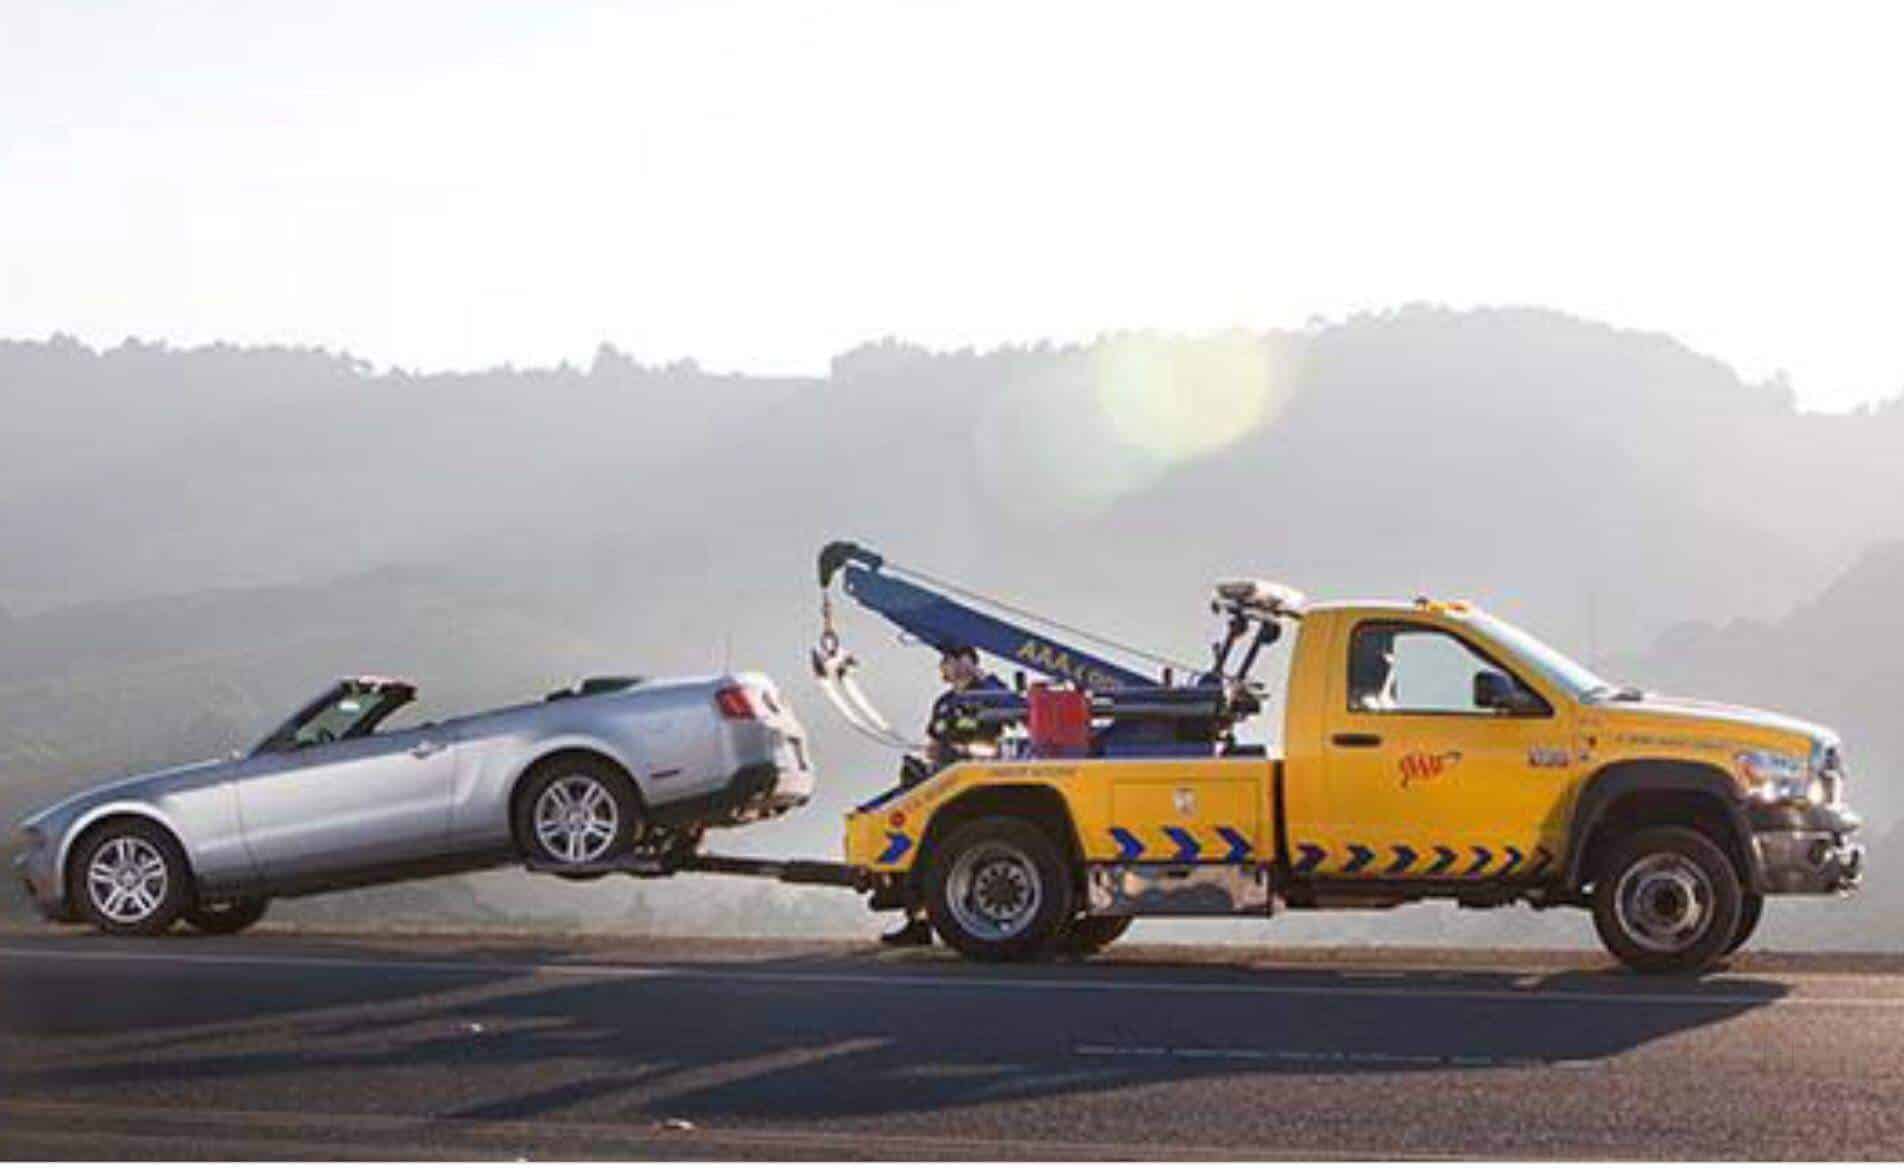 Towing Services Near Me in emergency cases | BombaGiù